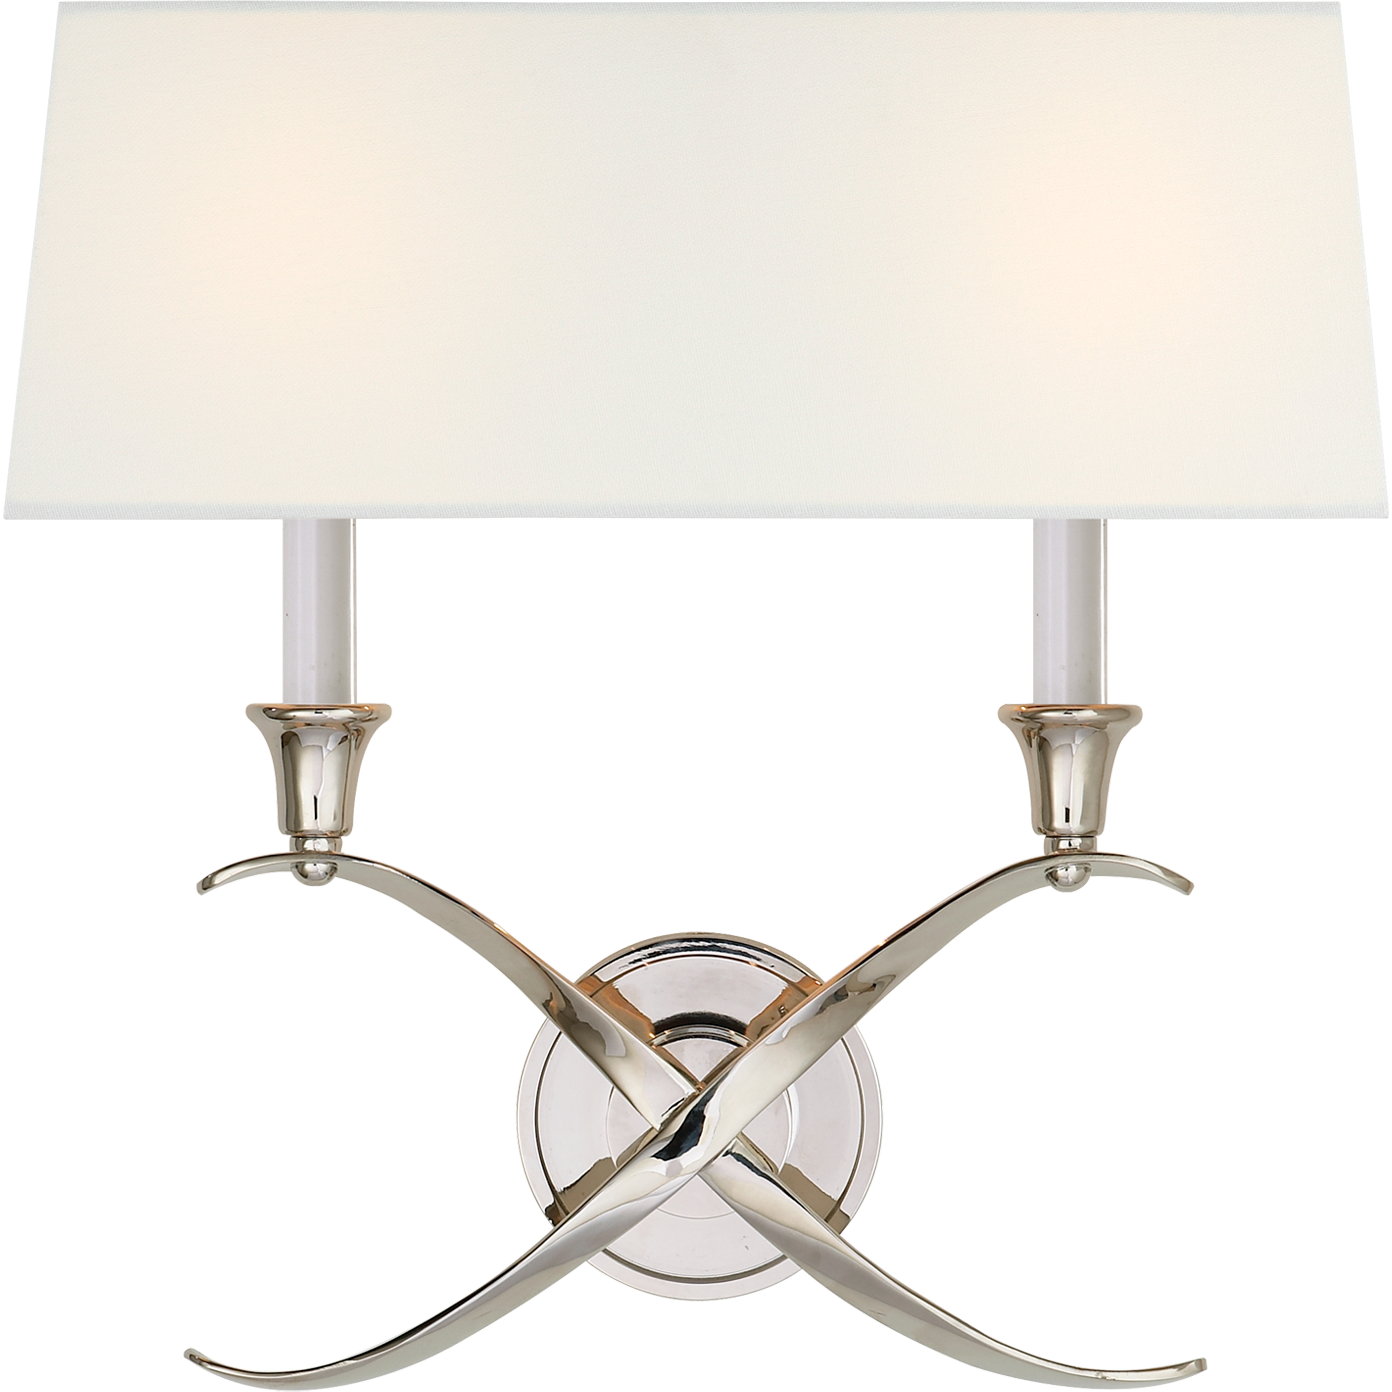 Cross Bouillotte Large Sconce with Linen Shade